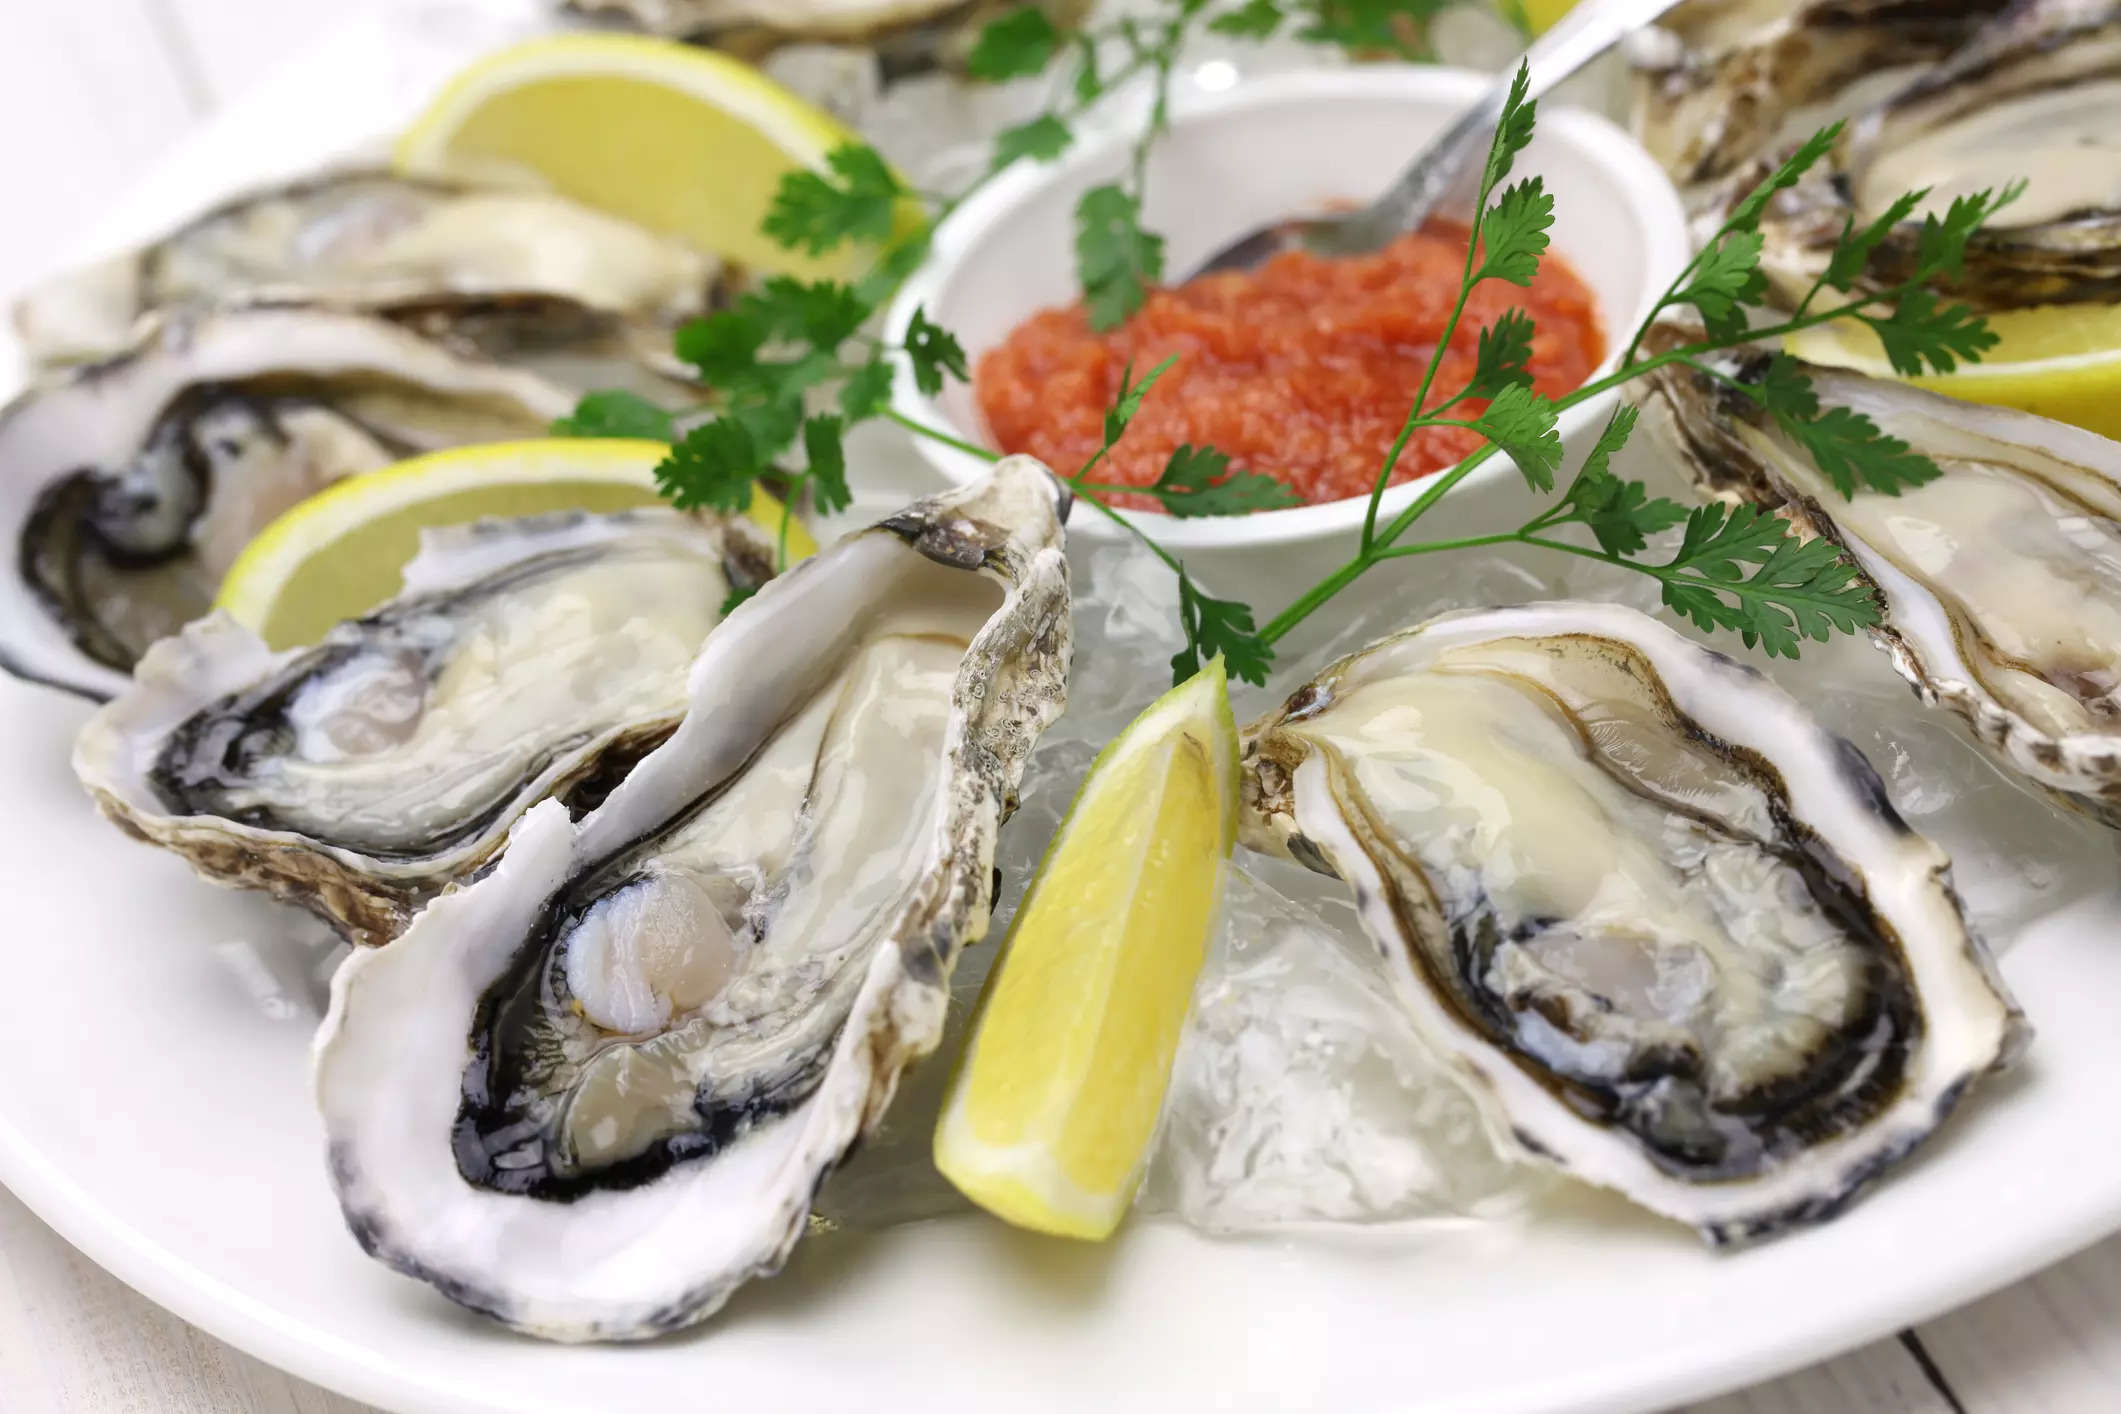 Oysters are ​associated with a healthy sex life – however, being filter feeders, they are likely to pick-up everything in the water, even bacteria. Therefore, eating them mindlessly can increase food poisoning risk. ​